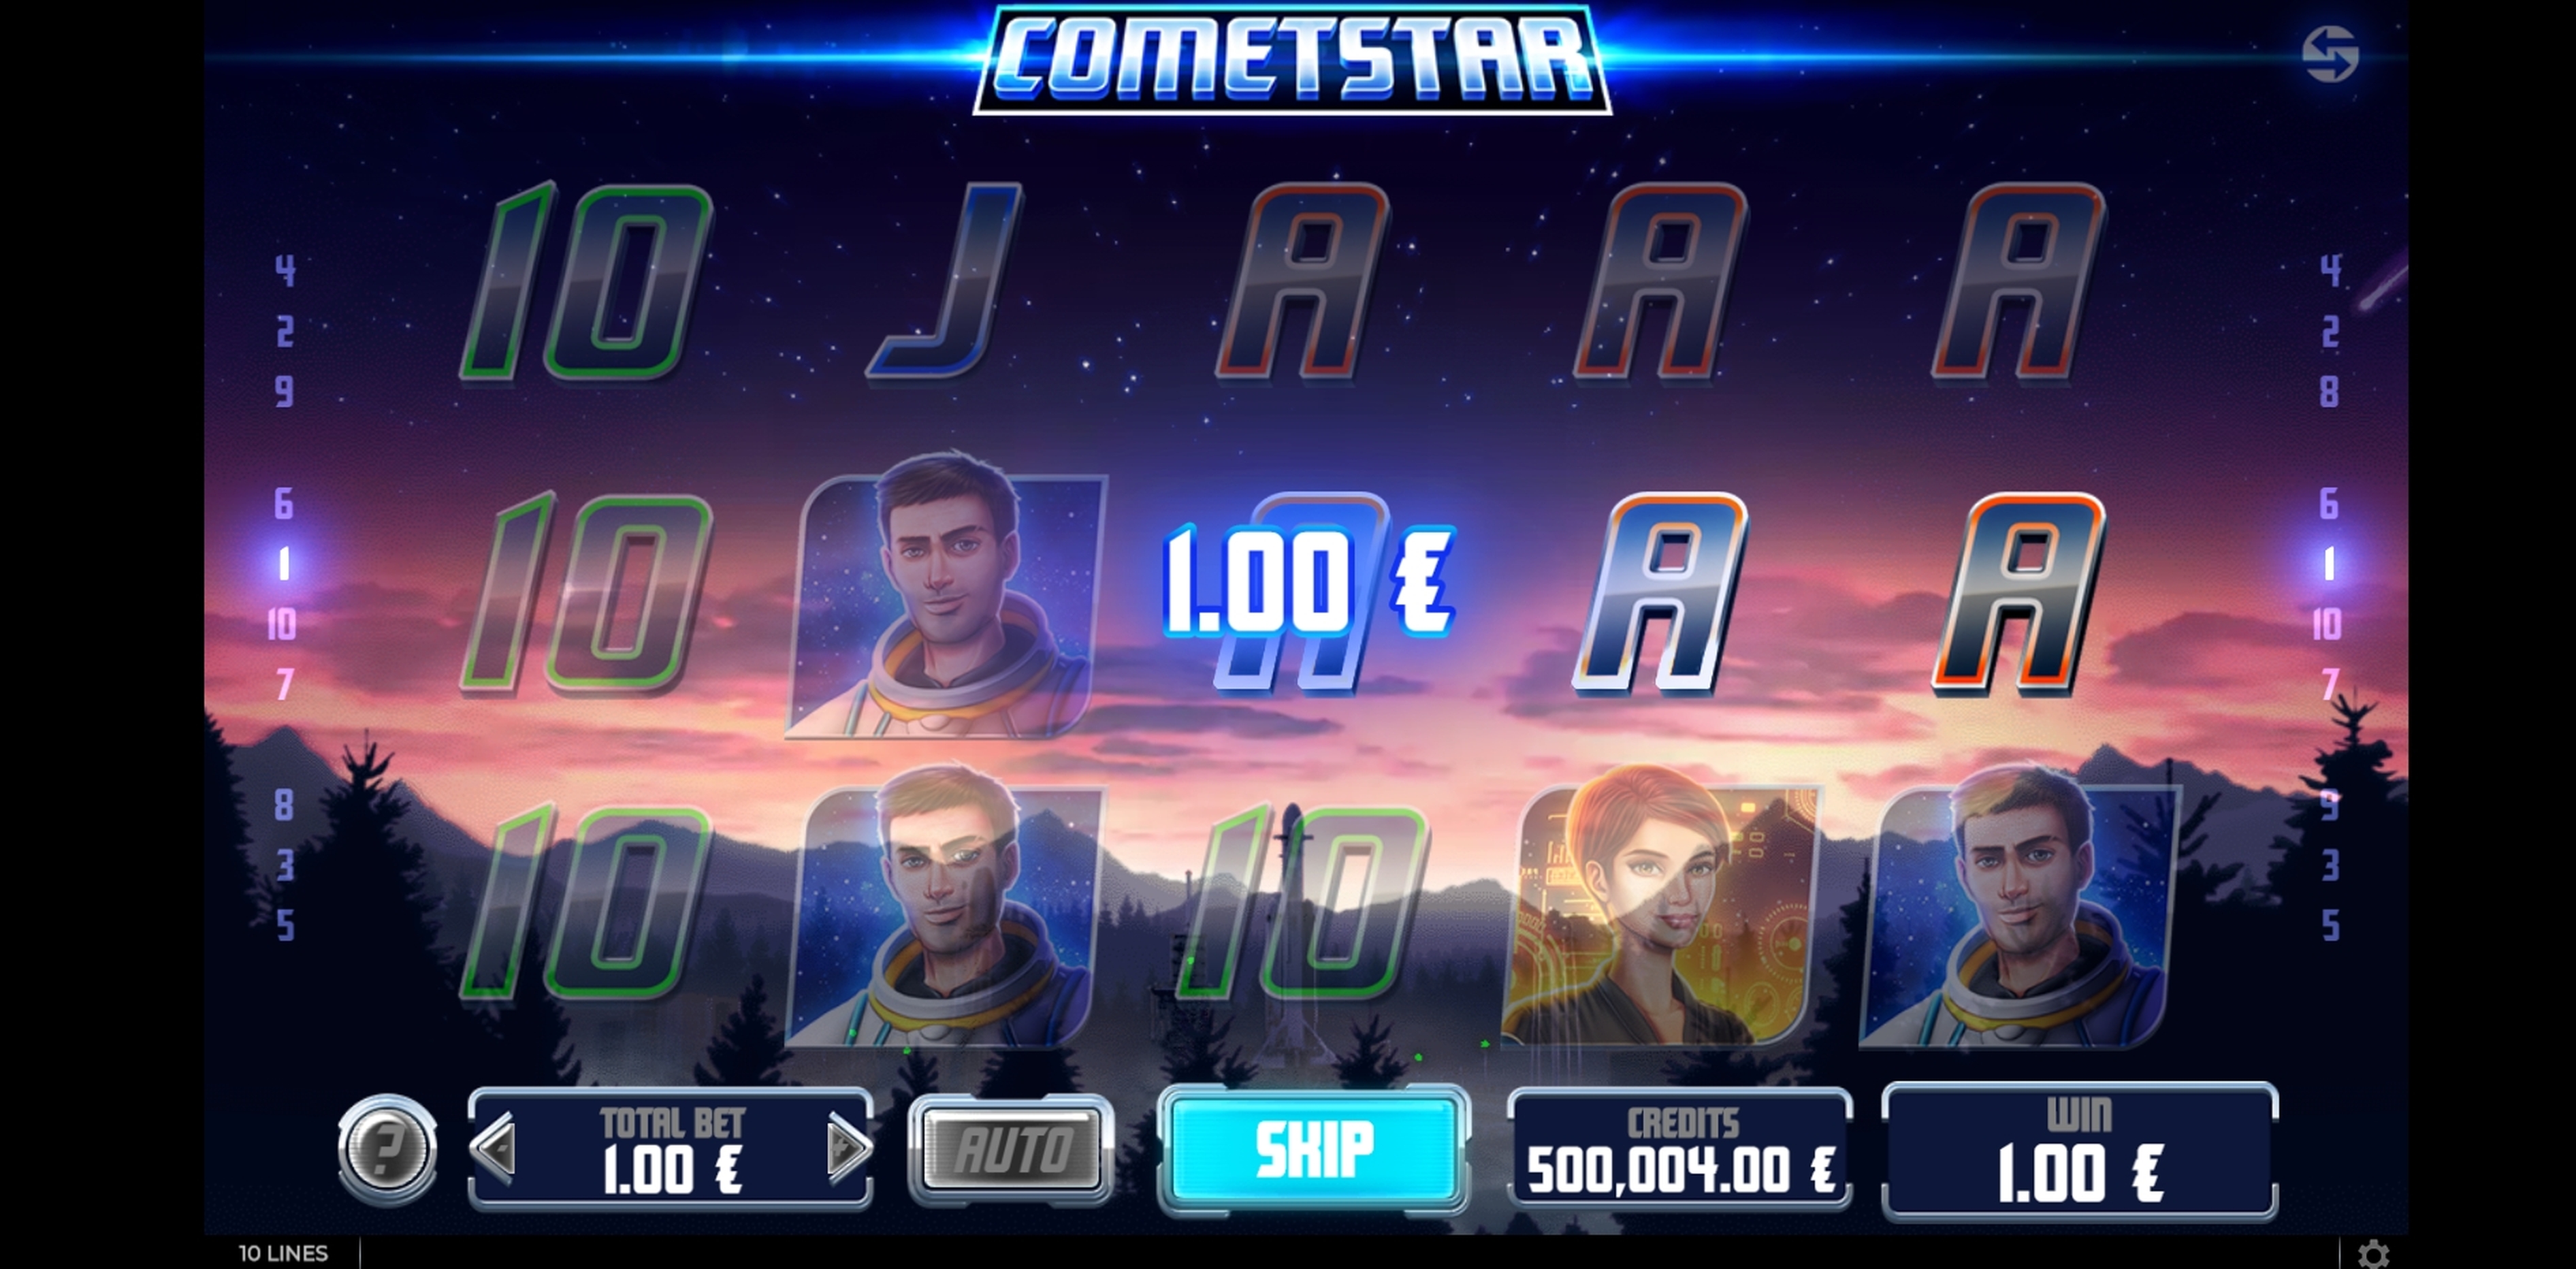 Win Money in CometStar Free Slot Game by GAMING1